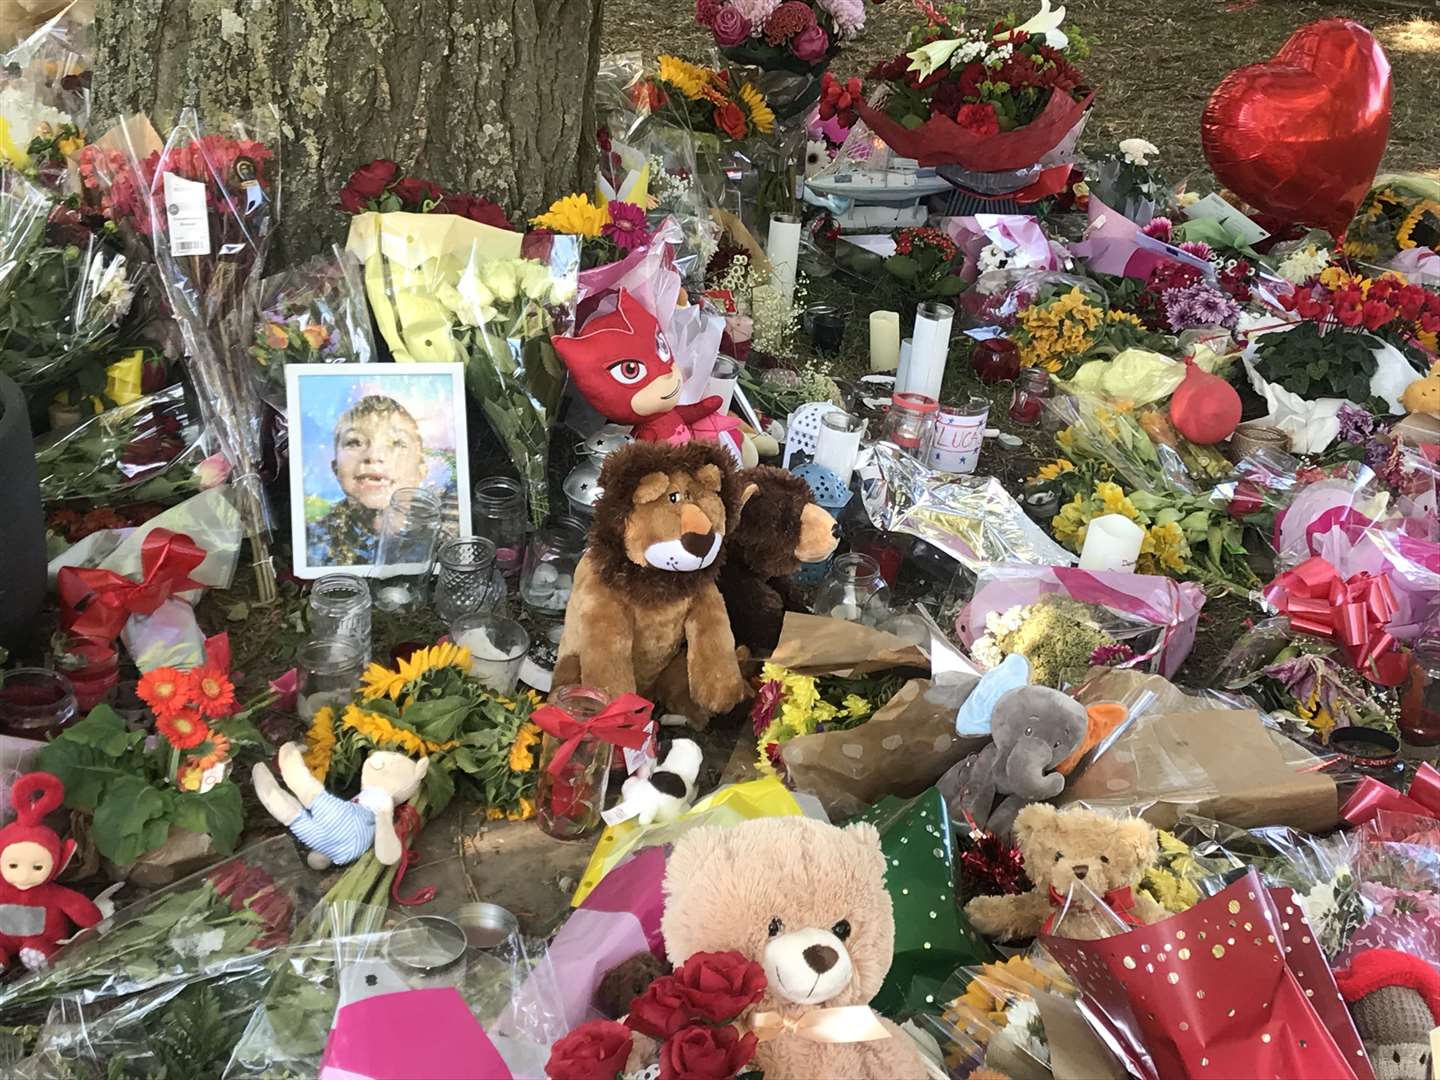 Touching tributes to Lucas Dobson have been placed around a tree at Sandwich Quay